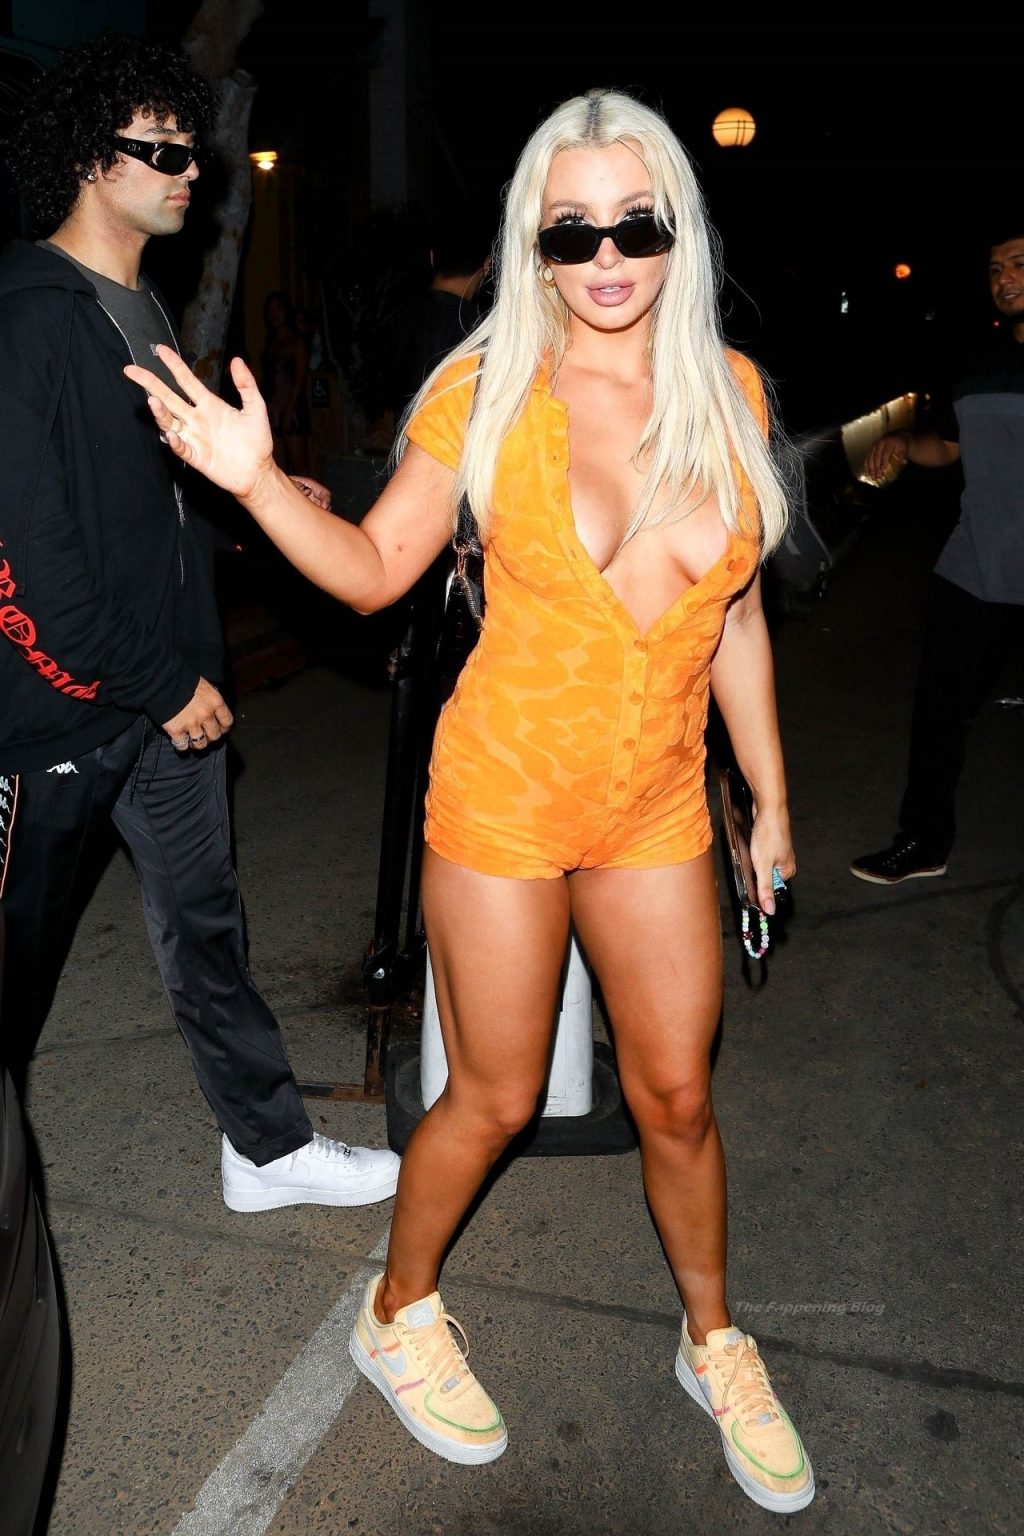 Tana Mongeau Continues To Be Team Bryce Hall as She Cozies Up to Him Outside an LA Club (15 Photos + Video)